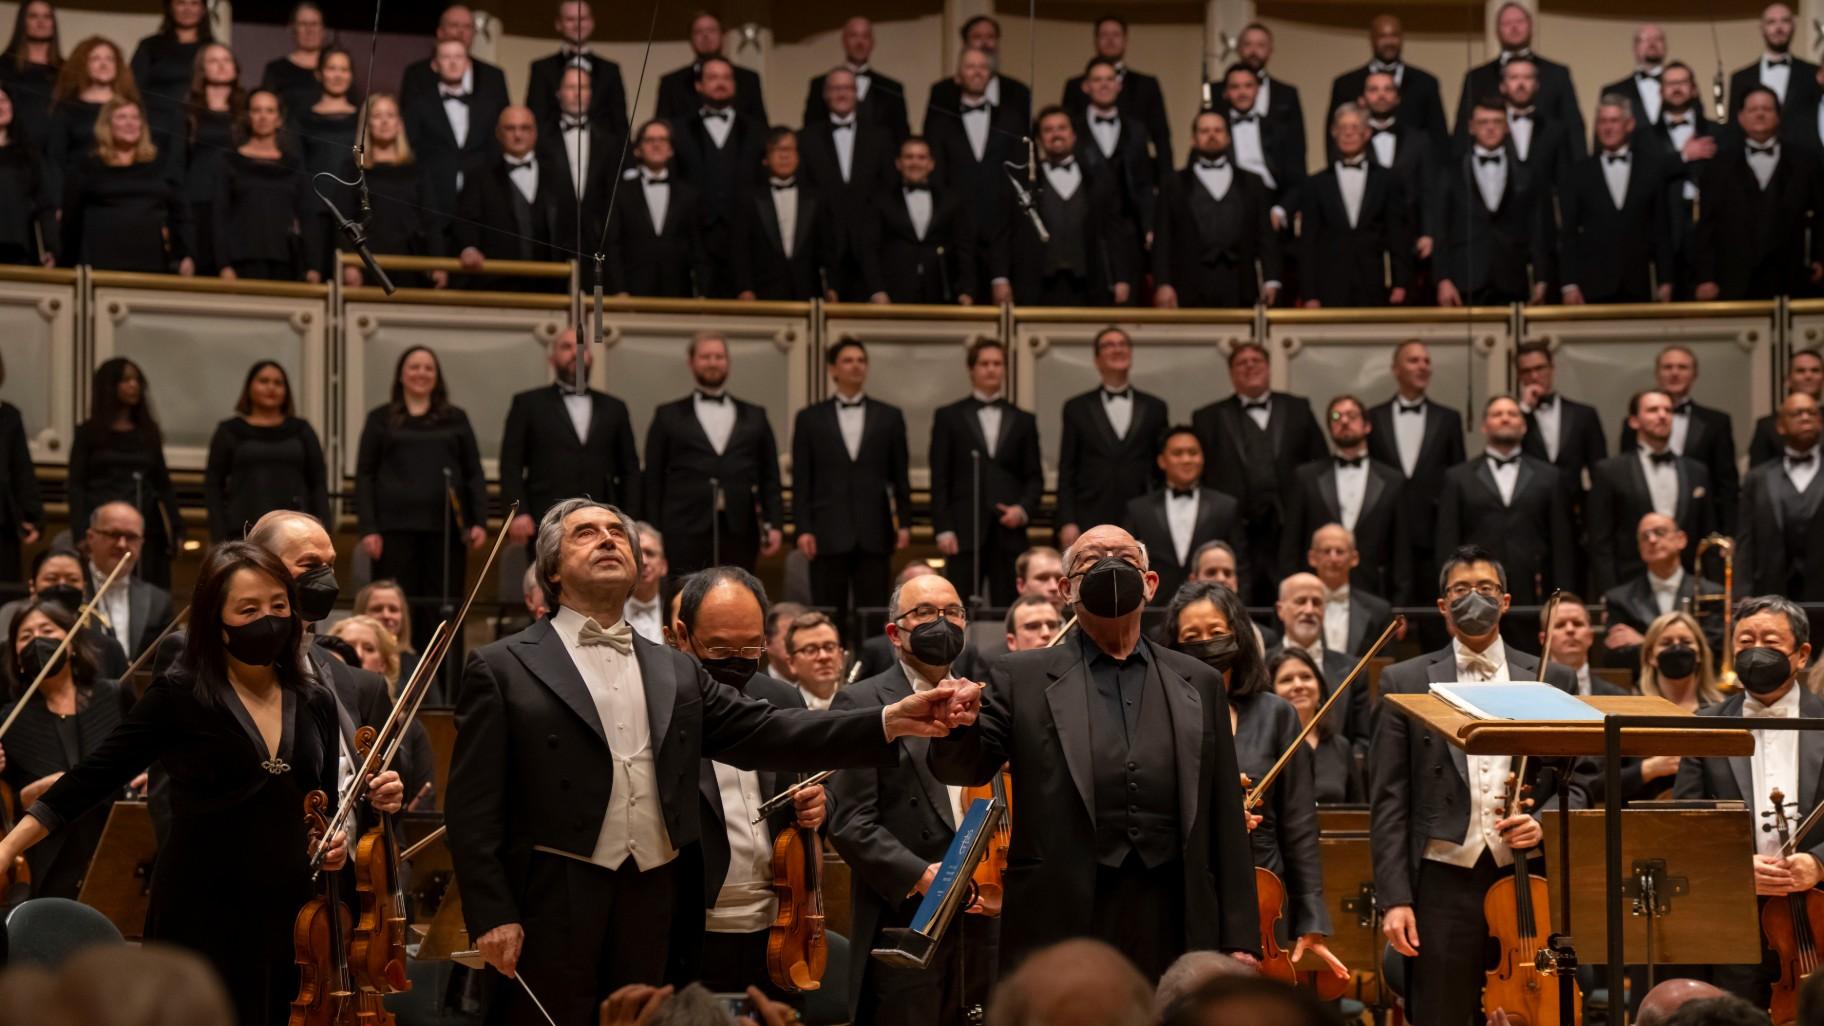 Music Director Riccardo Muti and Chorus Director Duain Wolfe acknowledge the audience following a performance of Beethoven’s “Symphony No. 9” on Feb. 24, 2022. (Credit: Todd Rosenberg)